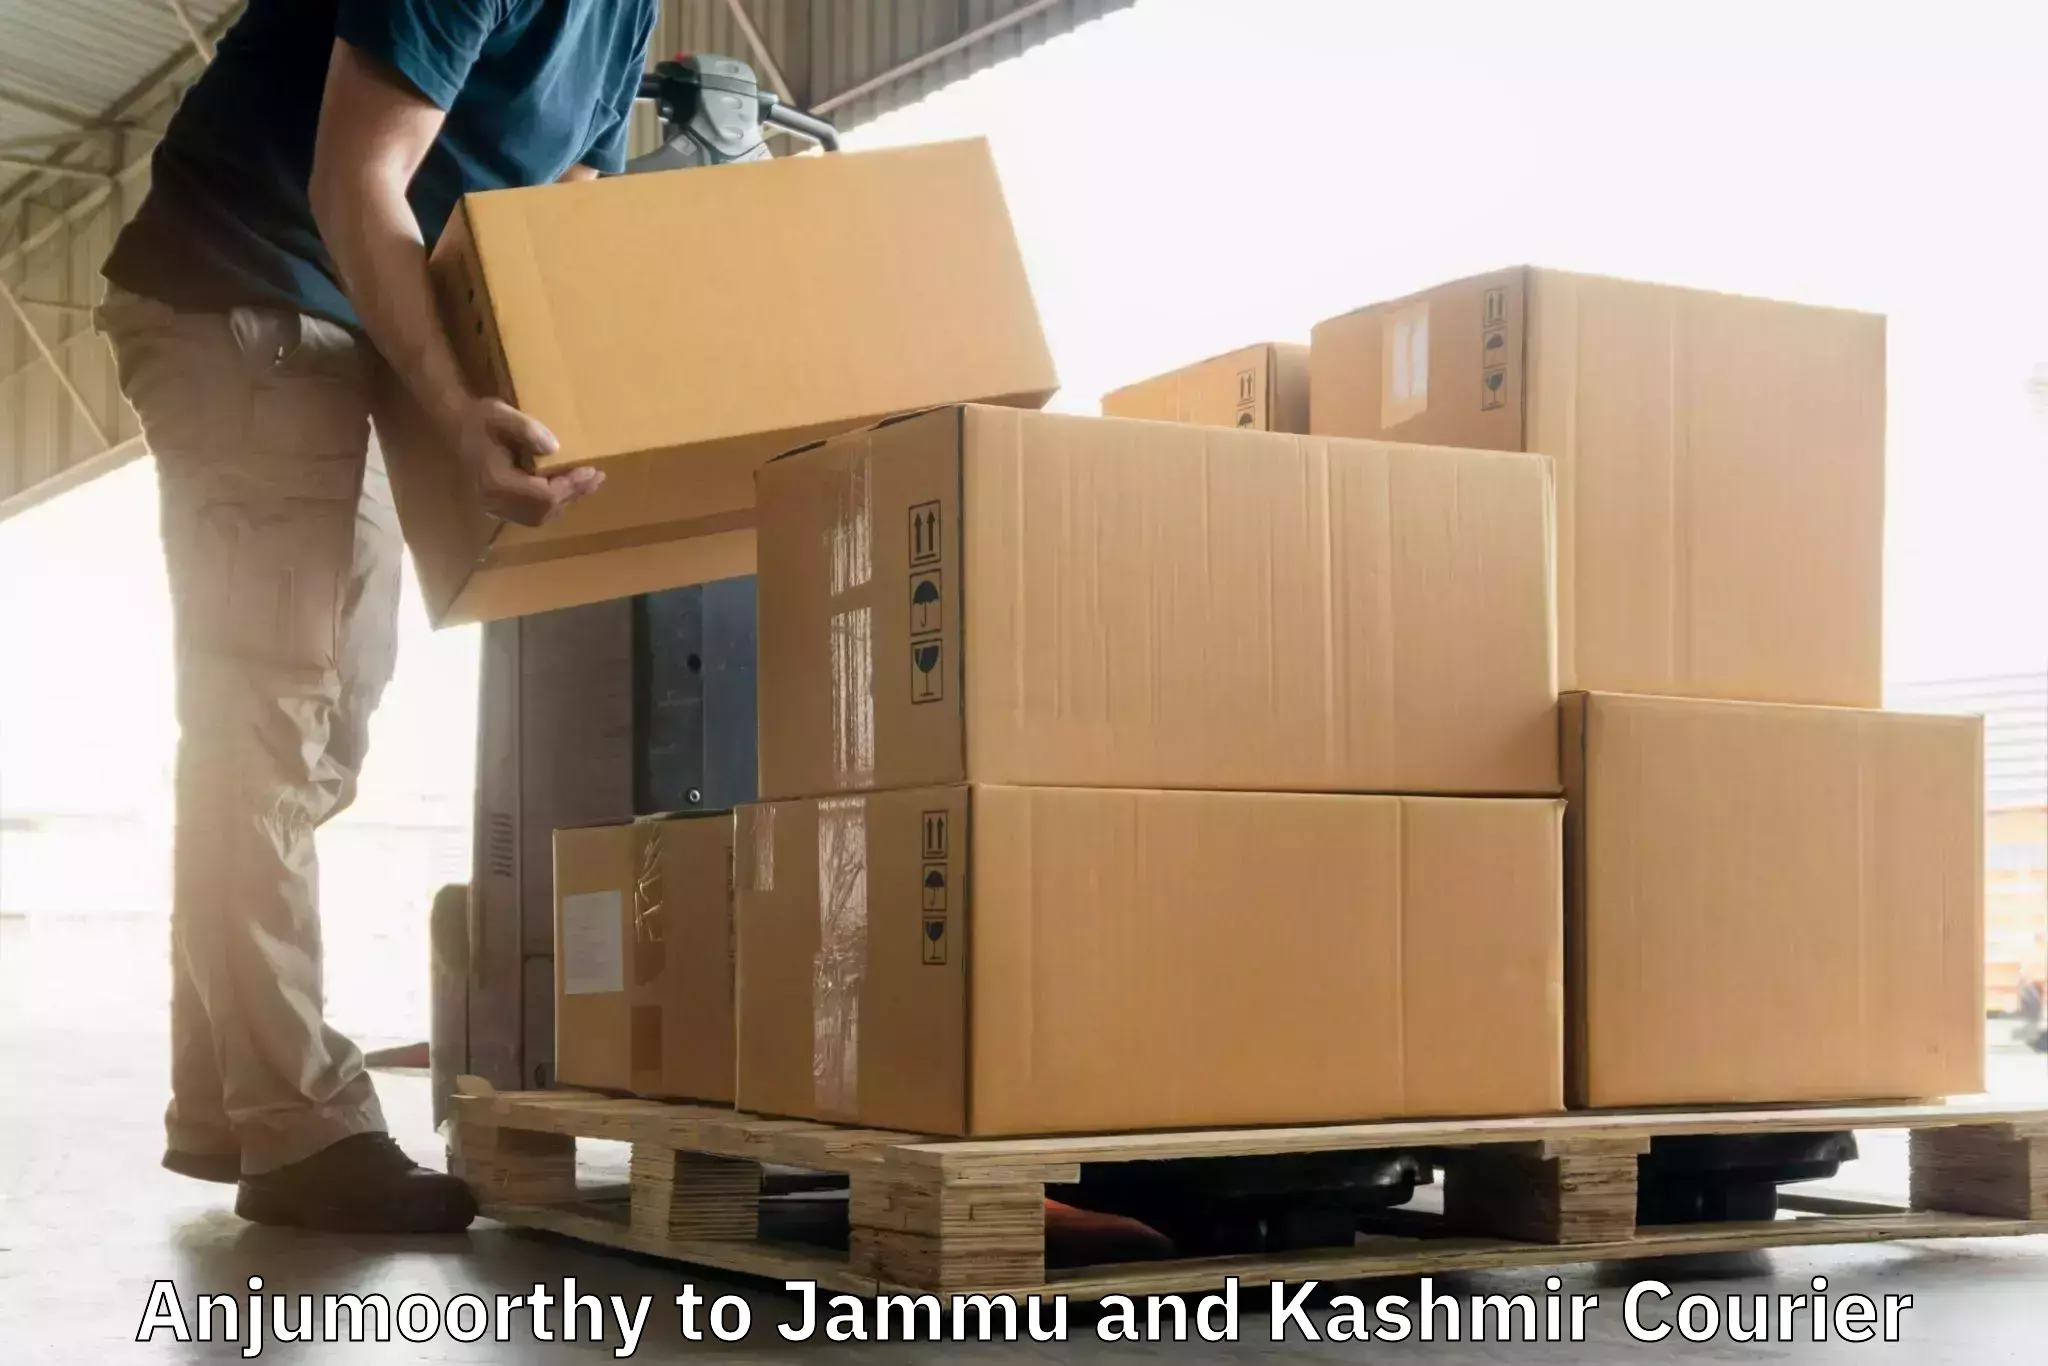 Cost-effective courier options Anjumoorthy to Anantnag